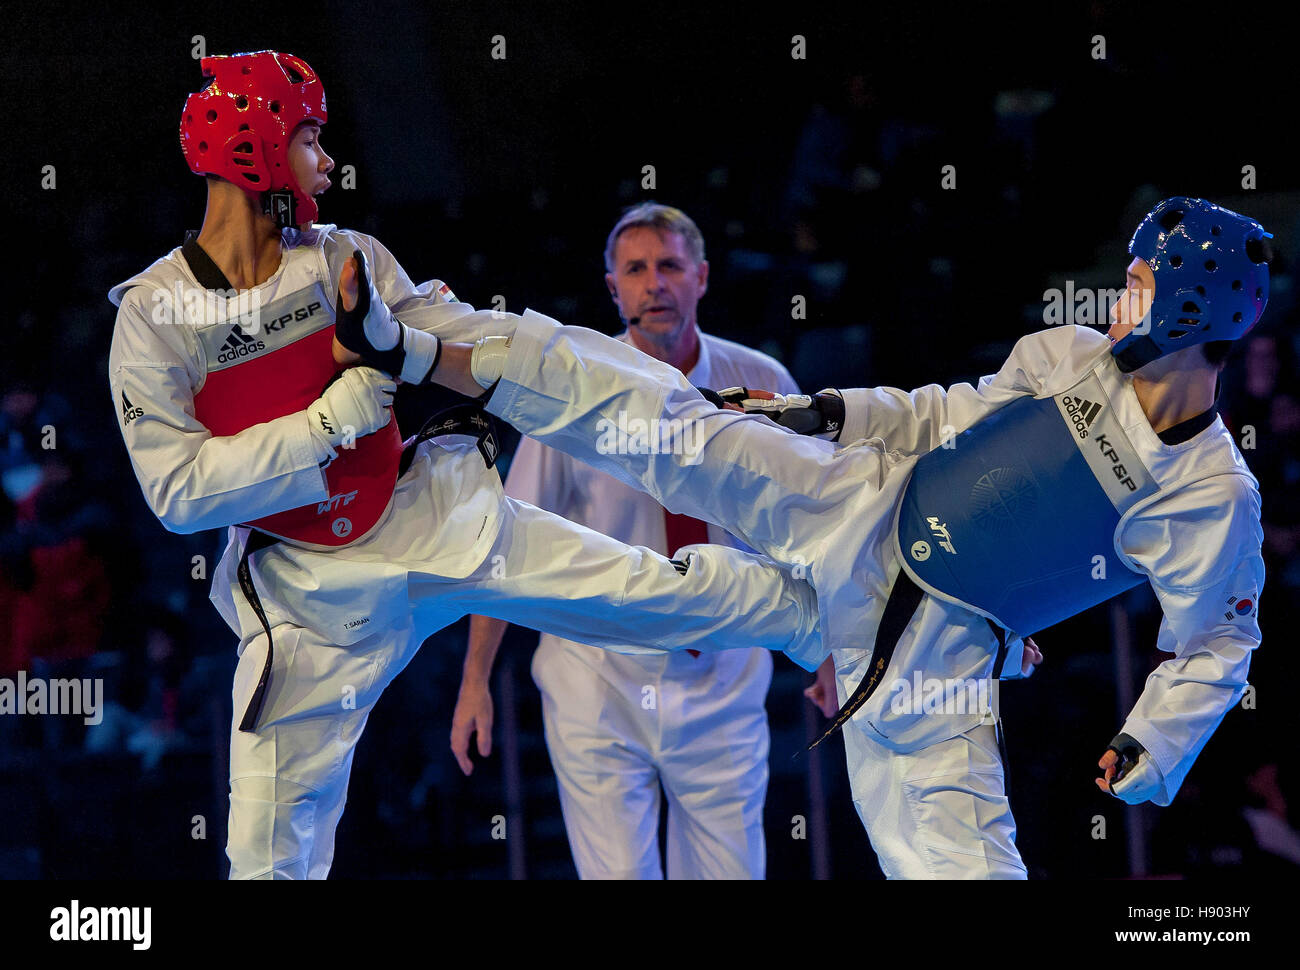 Burnaby, Canada. 16th Nov, 2016. WTF World Taekwondo Junior Championships, Jae-hee Mok (KOR) blue and Saran Tangchatkaew (THA) red, compete in male 48kg class gold medal match. Mok took the gold medal Credit:  Peter Llewellyn/Alamy Live News Stock Photo